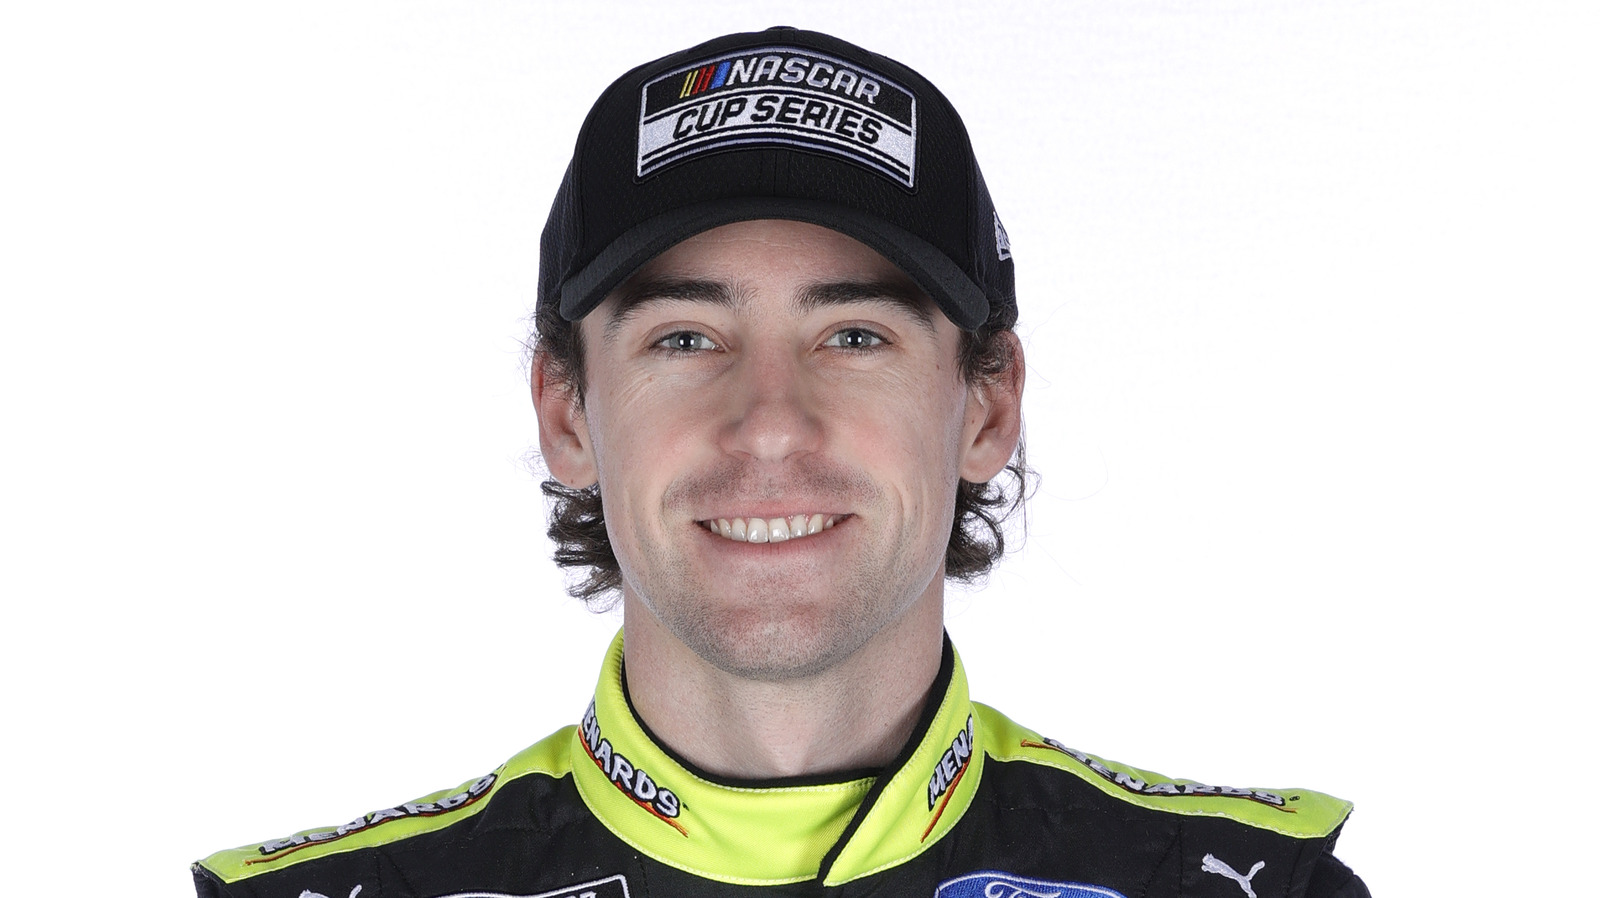 Ryan Blaney's Net Worth May Surprise You